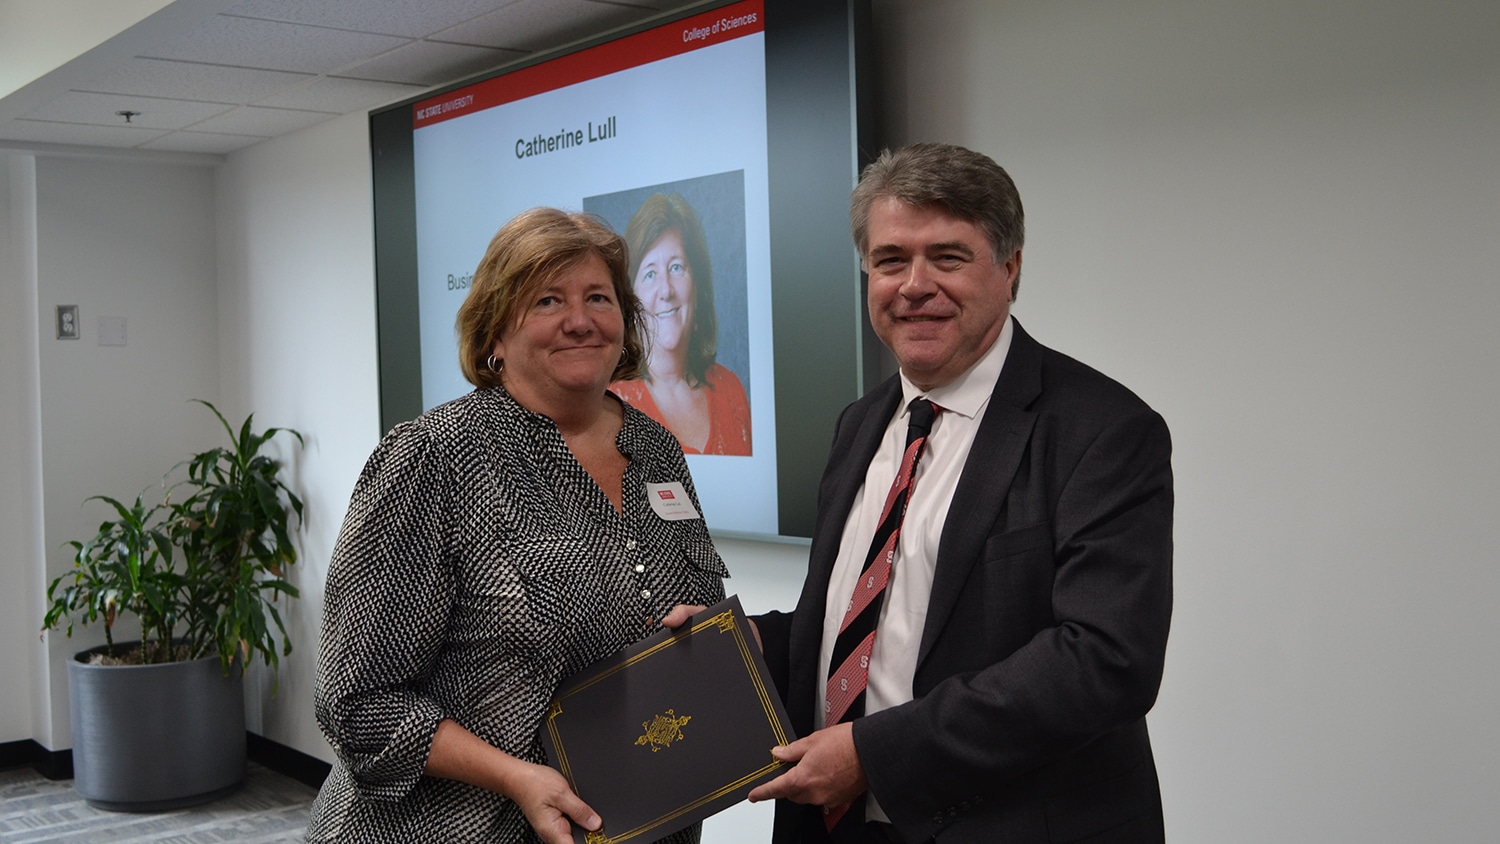 Catherine Lull receiving a recognition award from dean Lewis Owen